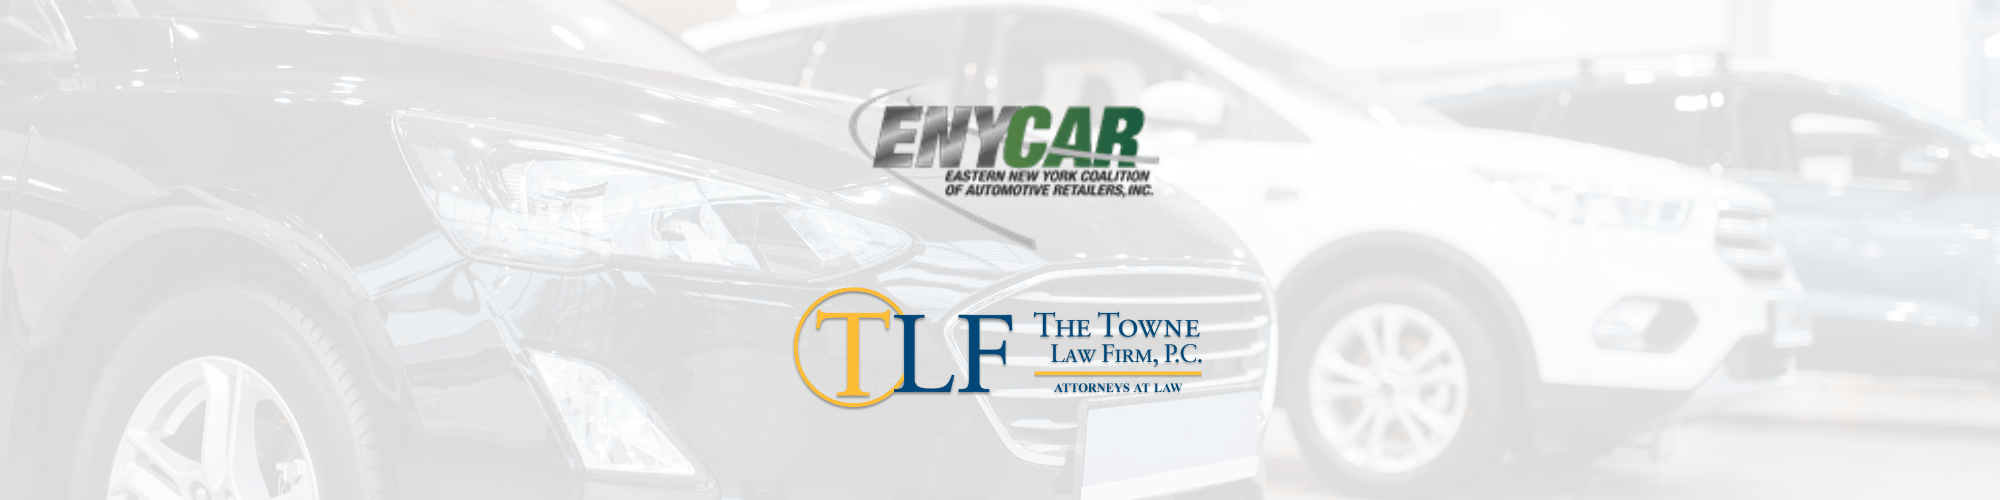 Blog banner, cars lined up at dealership with Eastern Coalition of New York's logo stacked on top of the The Towne Law Firm's logo